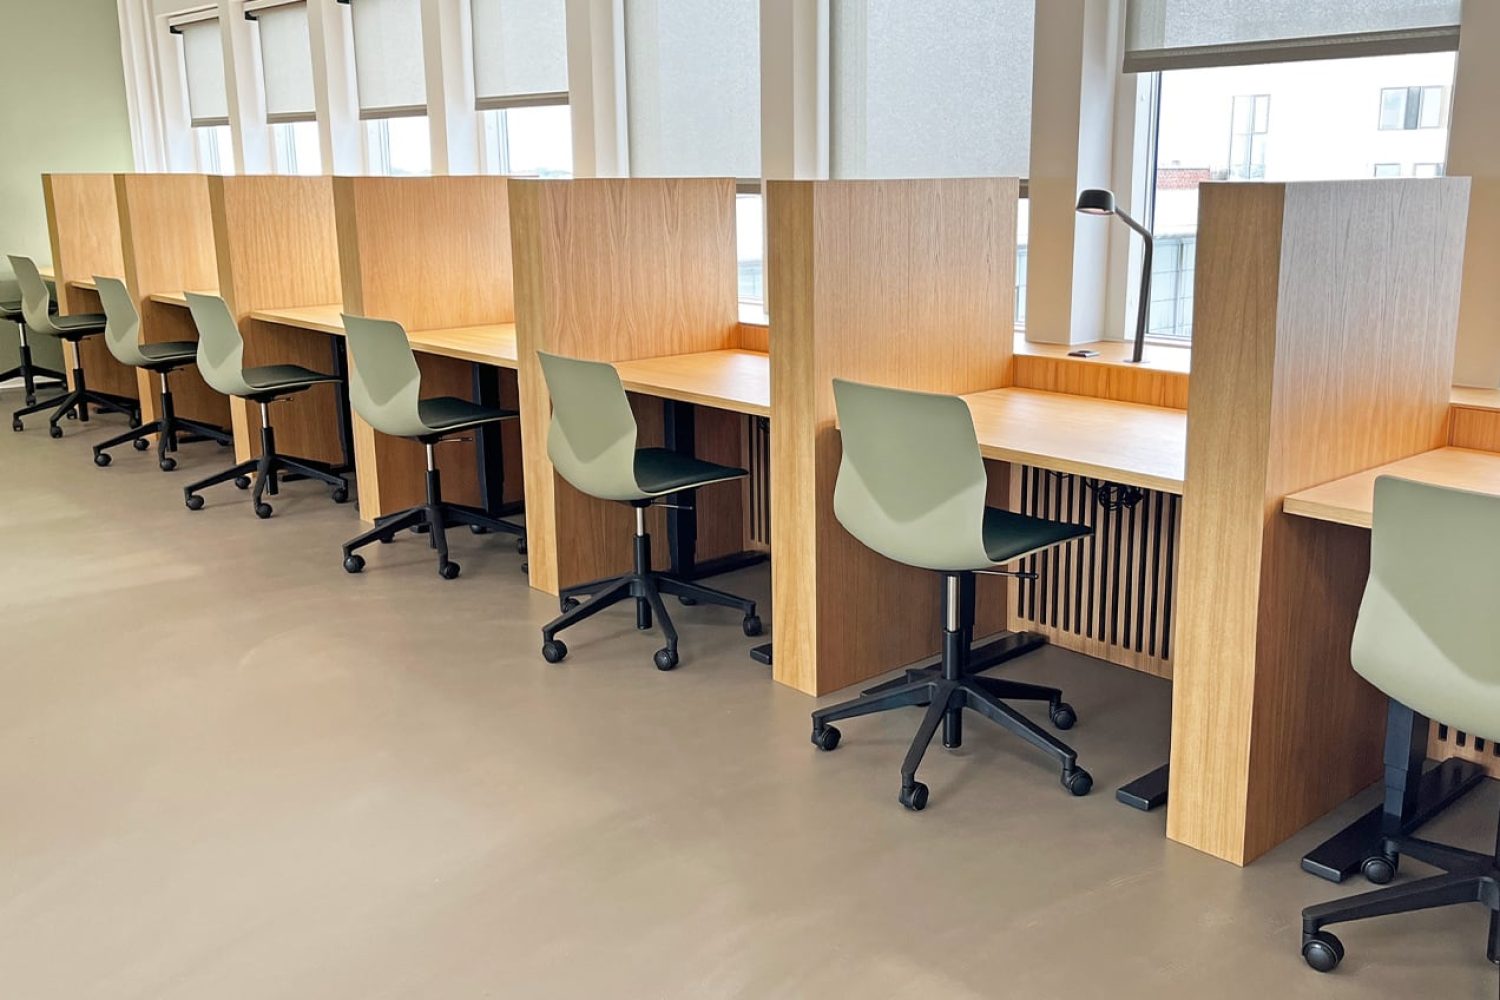 Study booths, desk workstations and chairs in a study hall